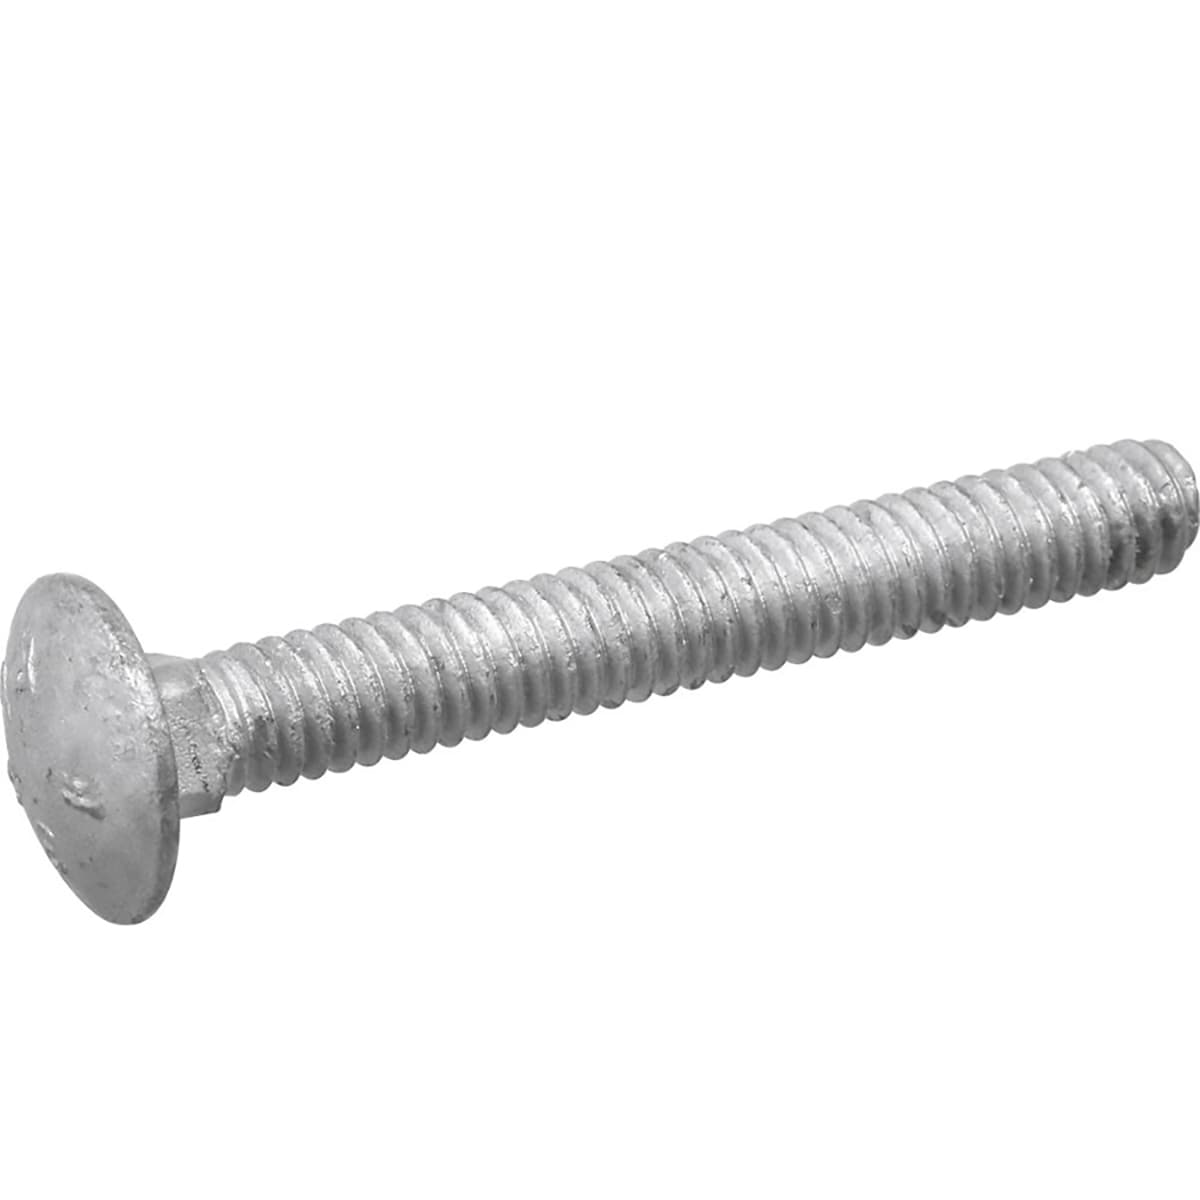 Galvanized Carriage Bolt With Nut, 3/8 x 2 midwest air technologies 328503b 10 Pack 